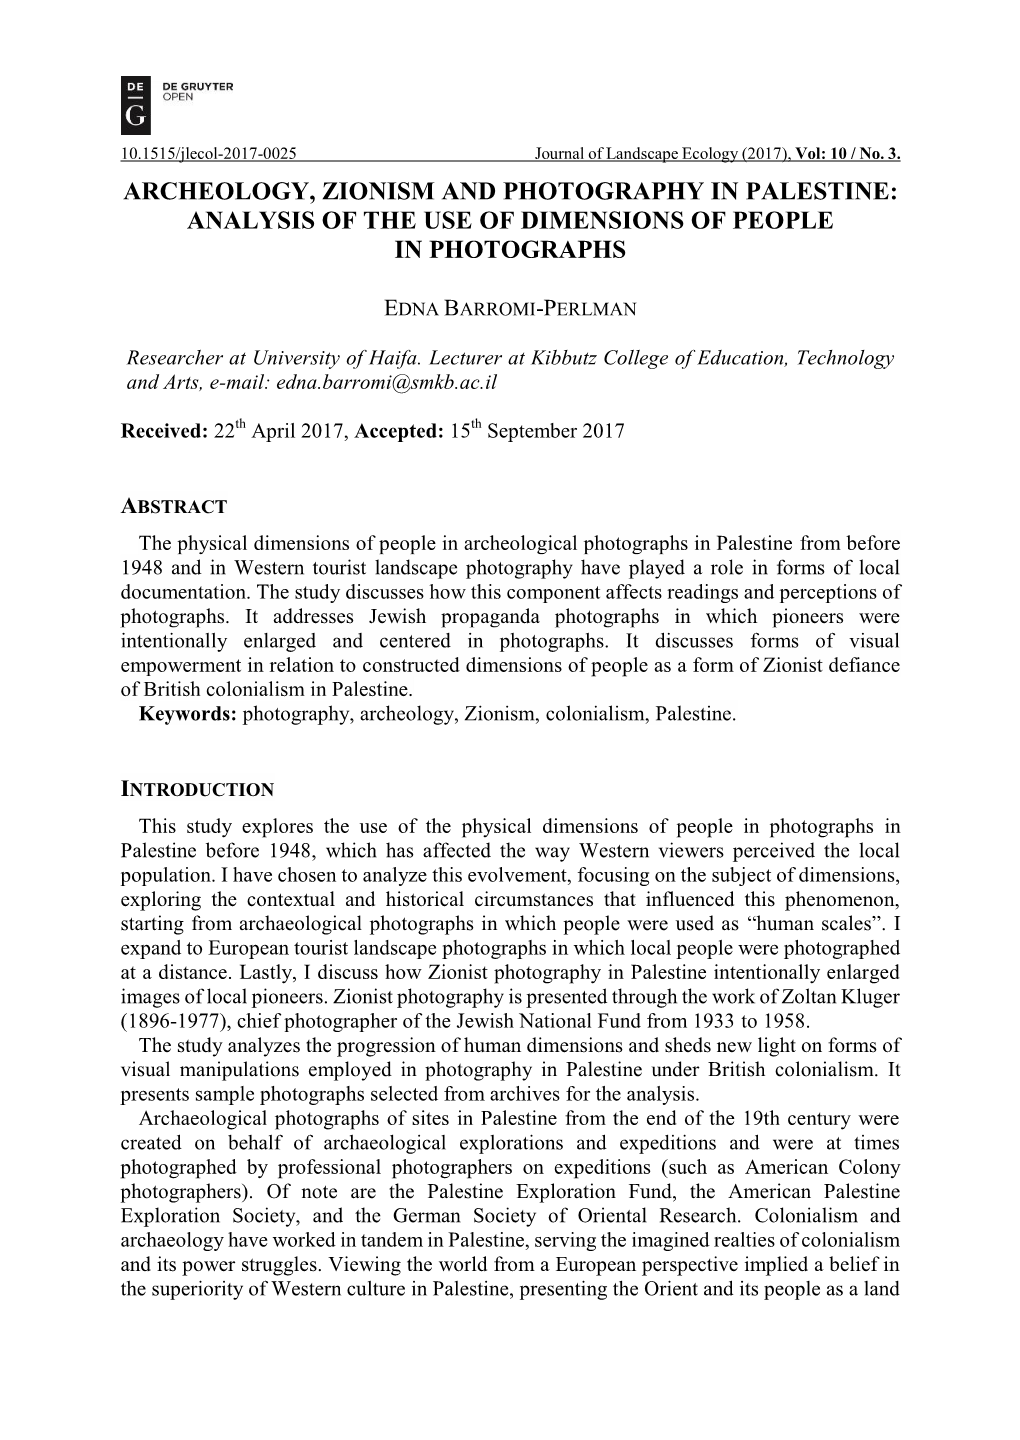 Archeology, Zionism and Photography in Palestine: Analysis of the Use of Dimensions of People in Photographs